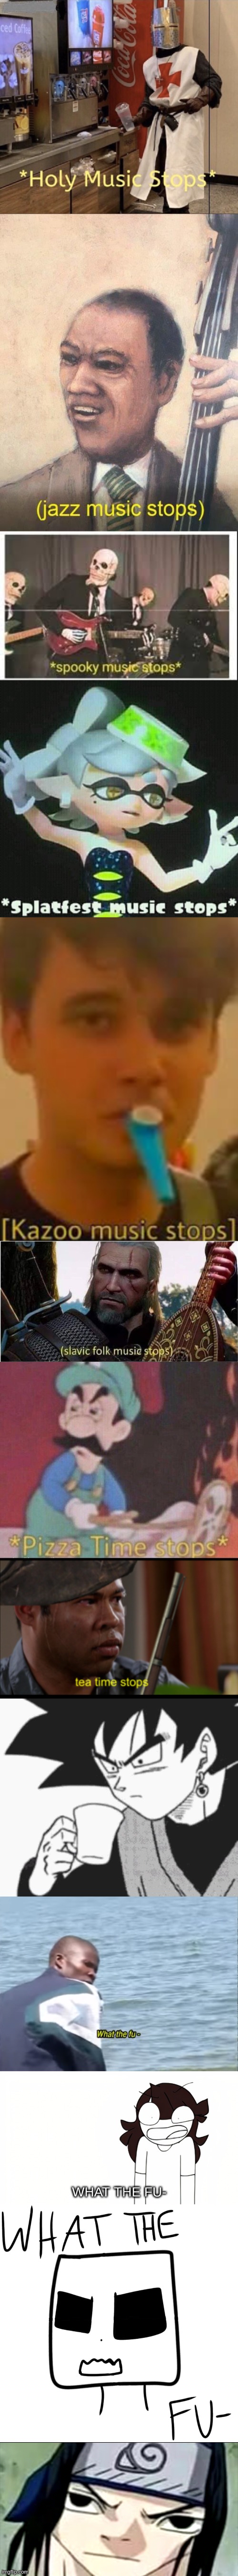 image tagged in holy music stops,jazz music stops,spooky music stops,splatfest music stops,kazoo music stops,slavic folk music stops | made w/ Imgflip meme maker